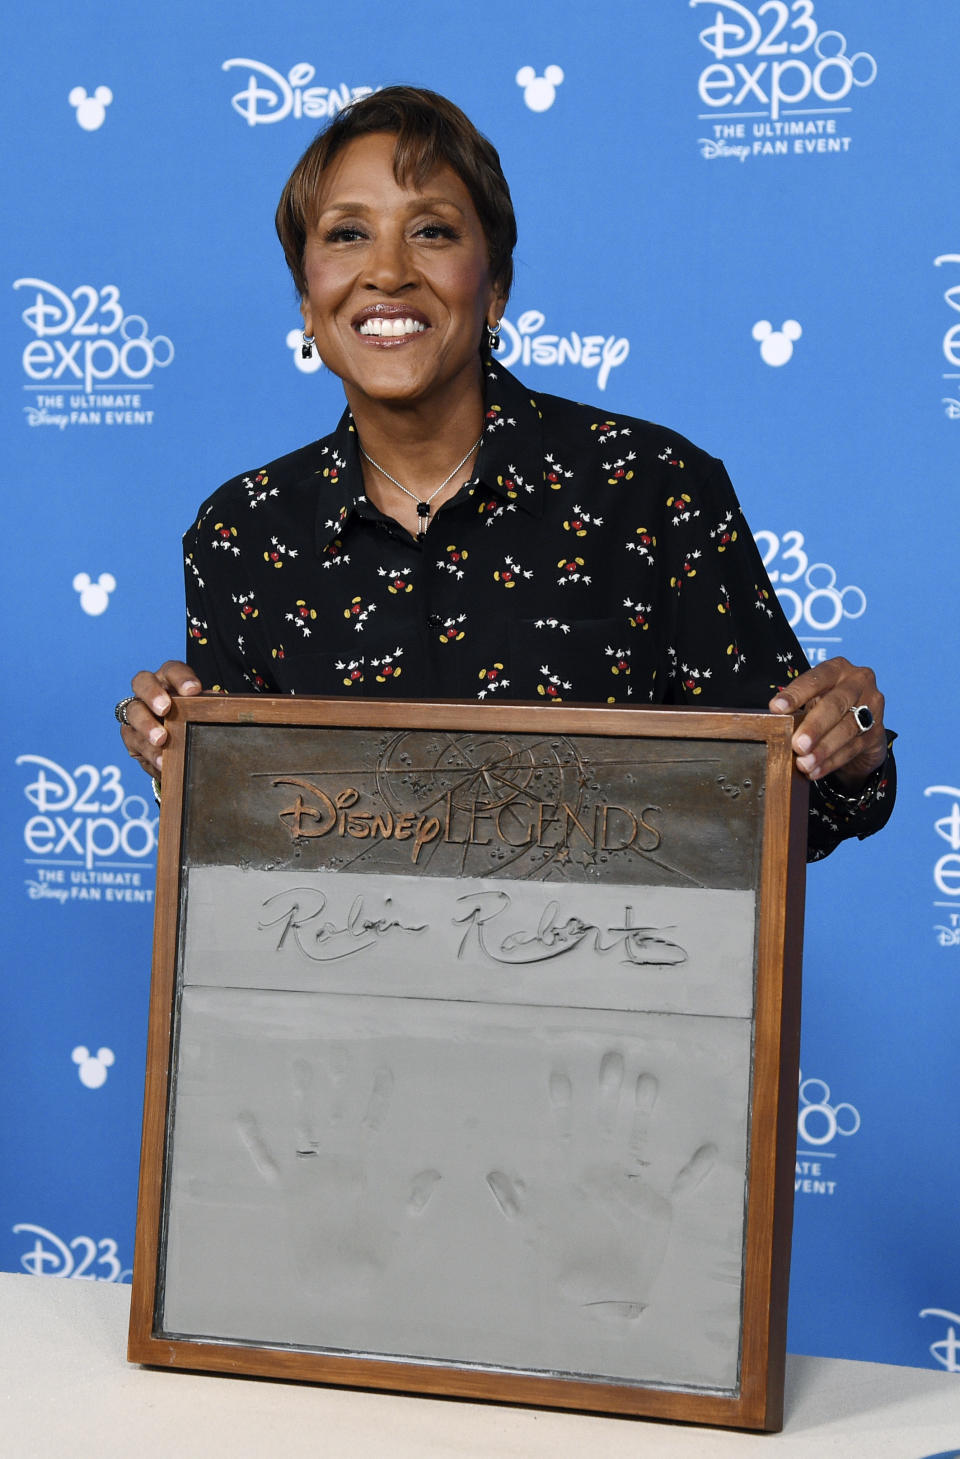 Television personality Robin Roberts poses during her handprint ceremony at the Disney Legends press line during the 2019 D23 Expo, Friday, Aug. 23, 2019, in Anaheim, Calif. (Photo by Chris Pizzello/Invision/AP)